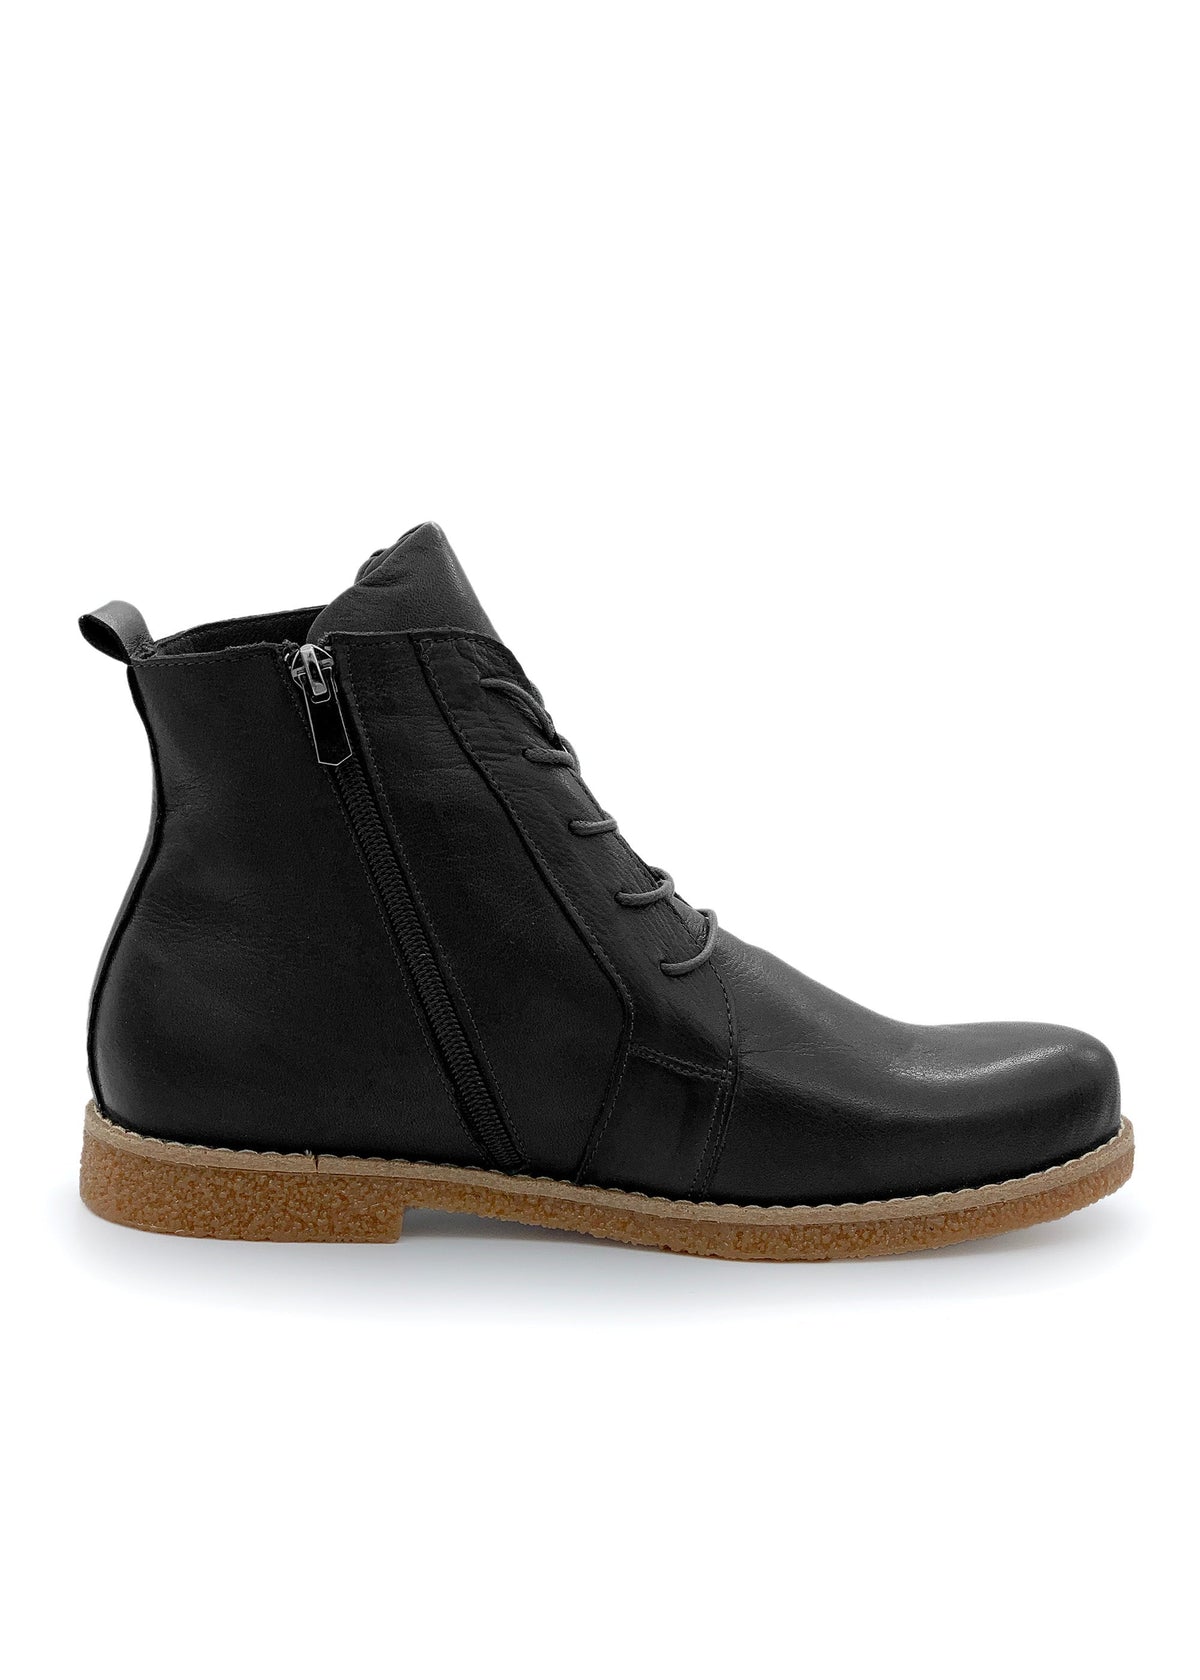 Winter ankle boots - black